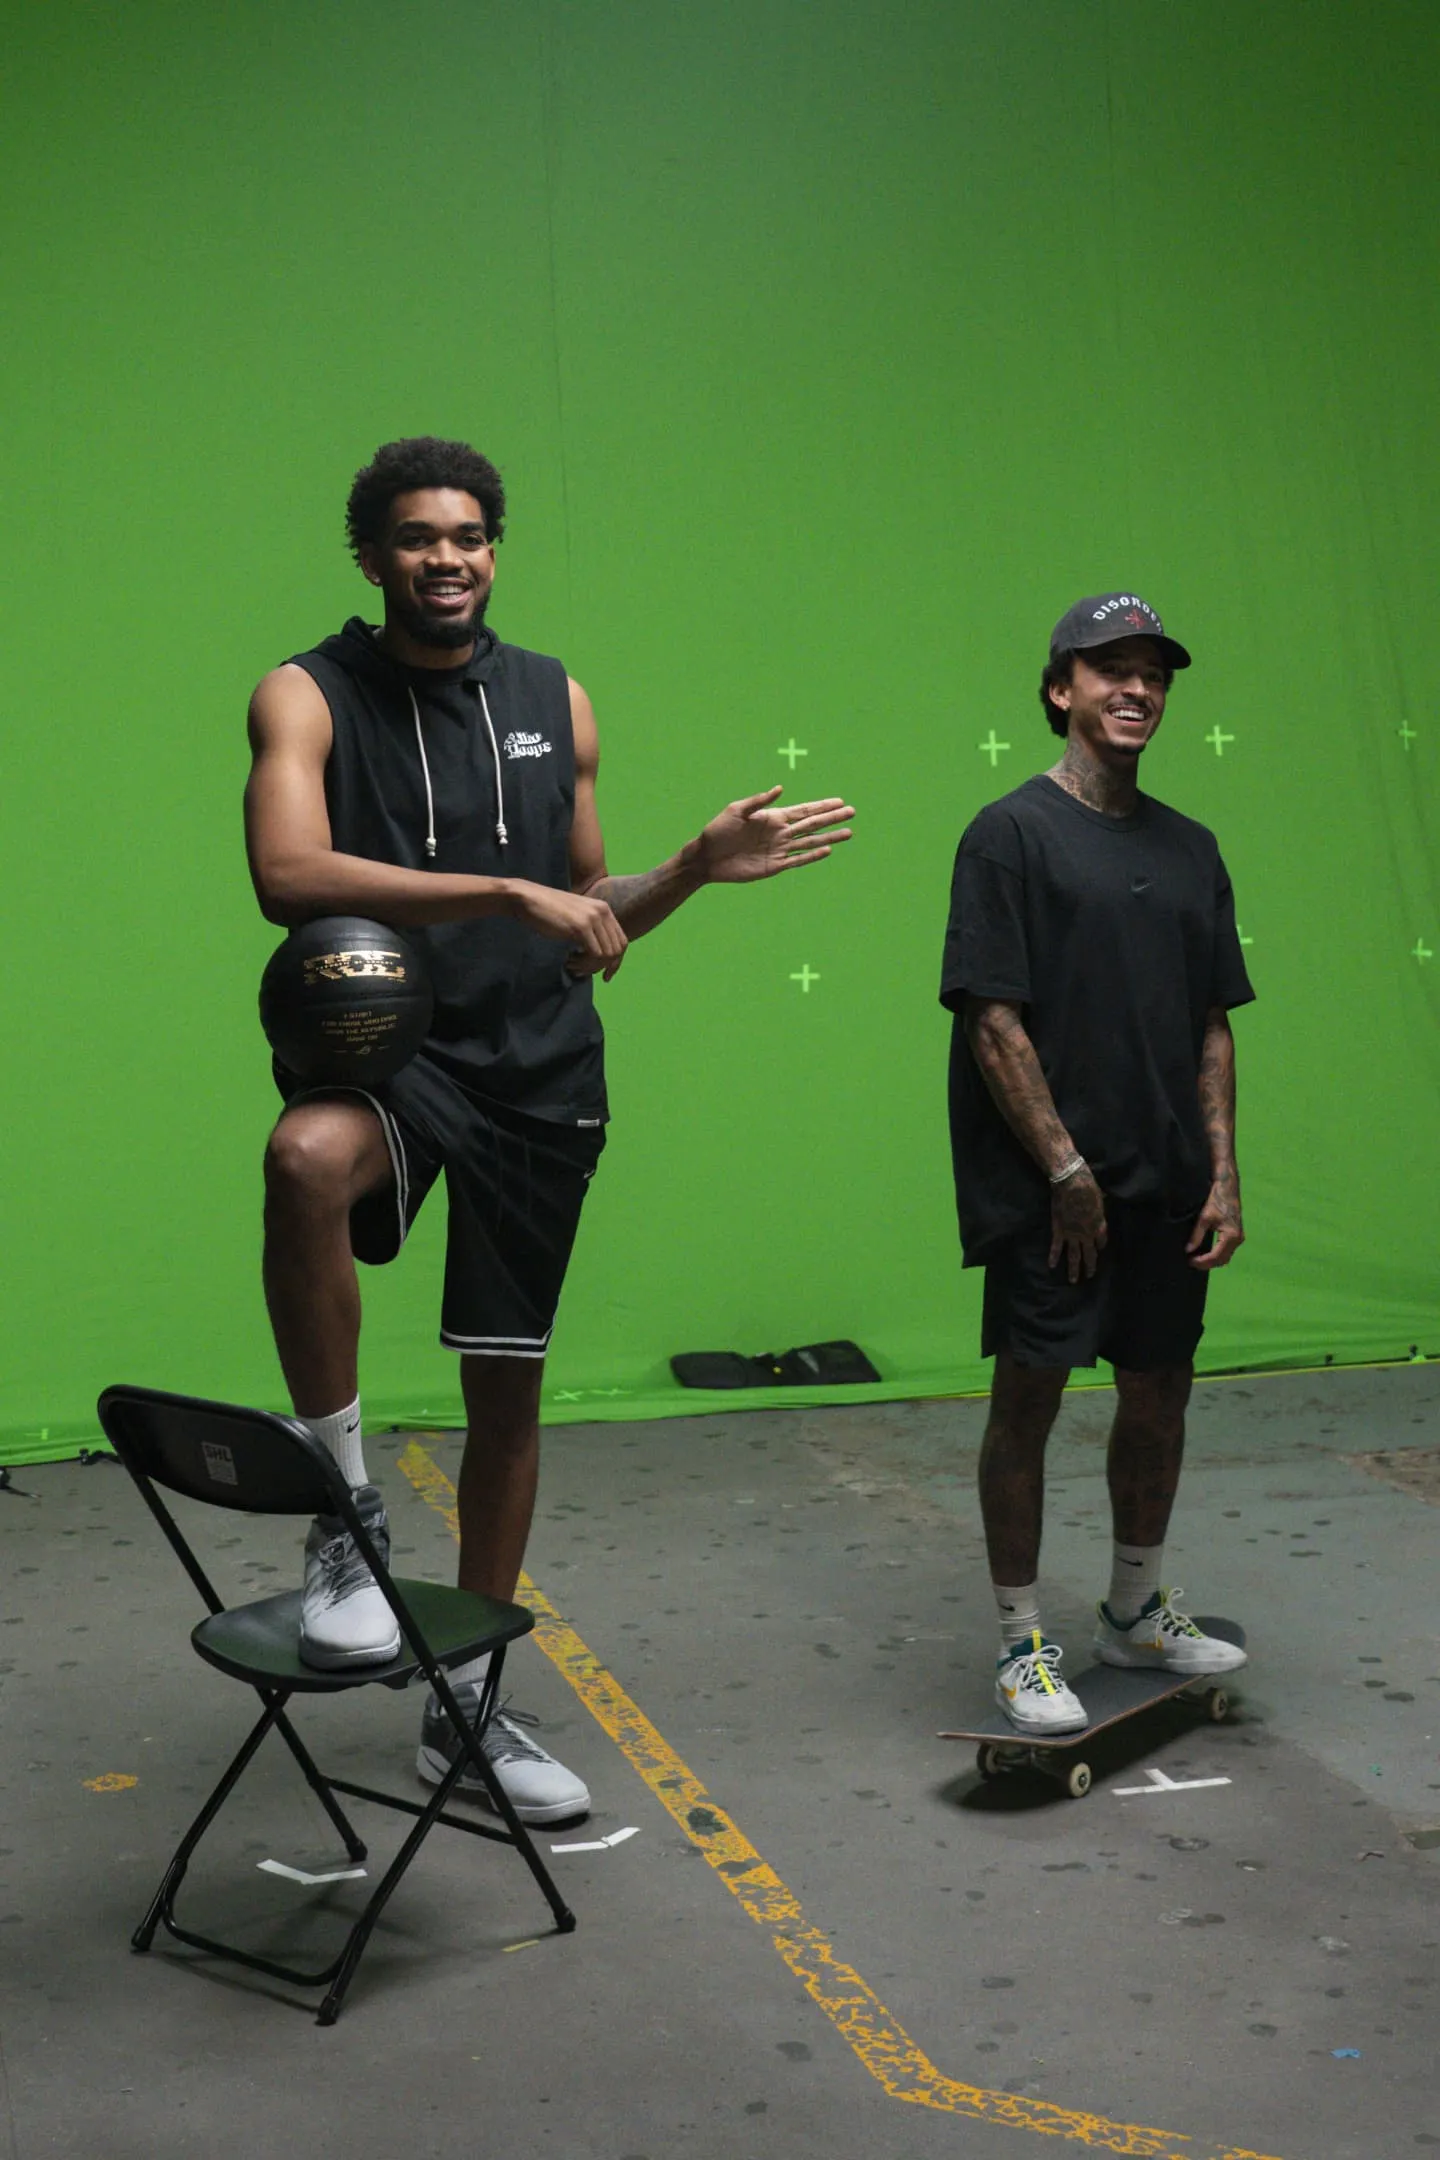 Karl-Anthony Towns and Nyjah Huston next to each other in front of a green screen, while Karl places his right leg on the chair and Nyjah is standing on a skateboard.